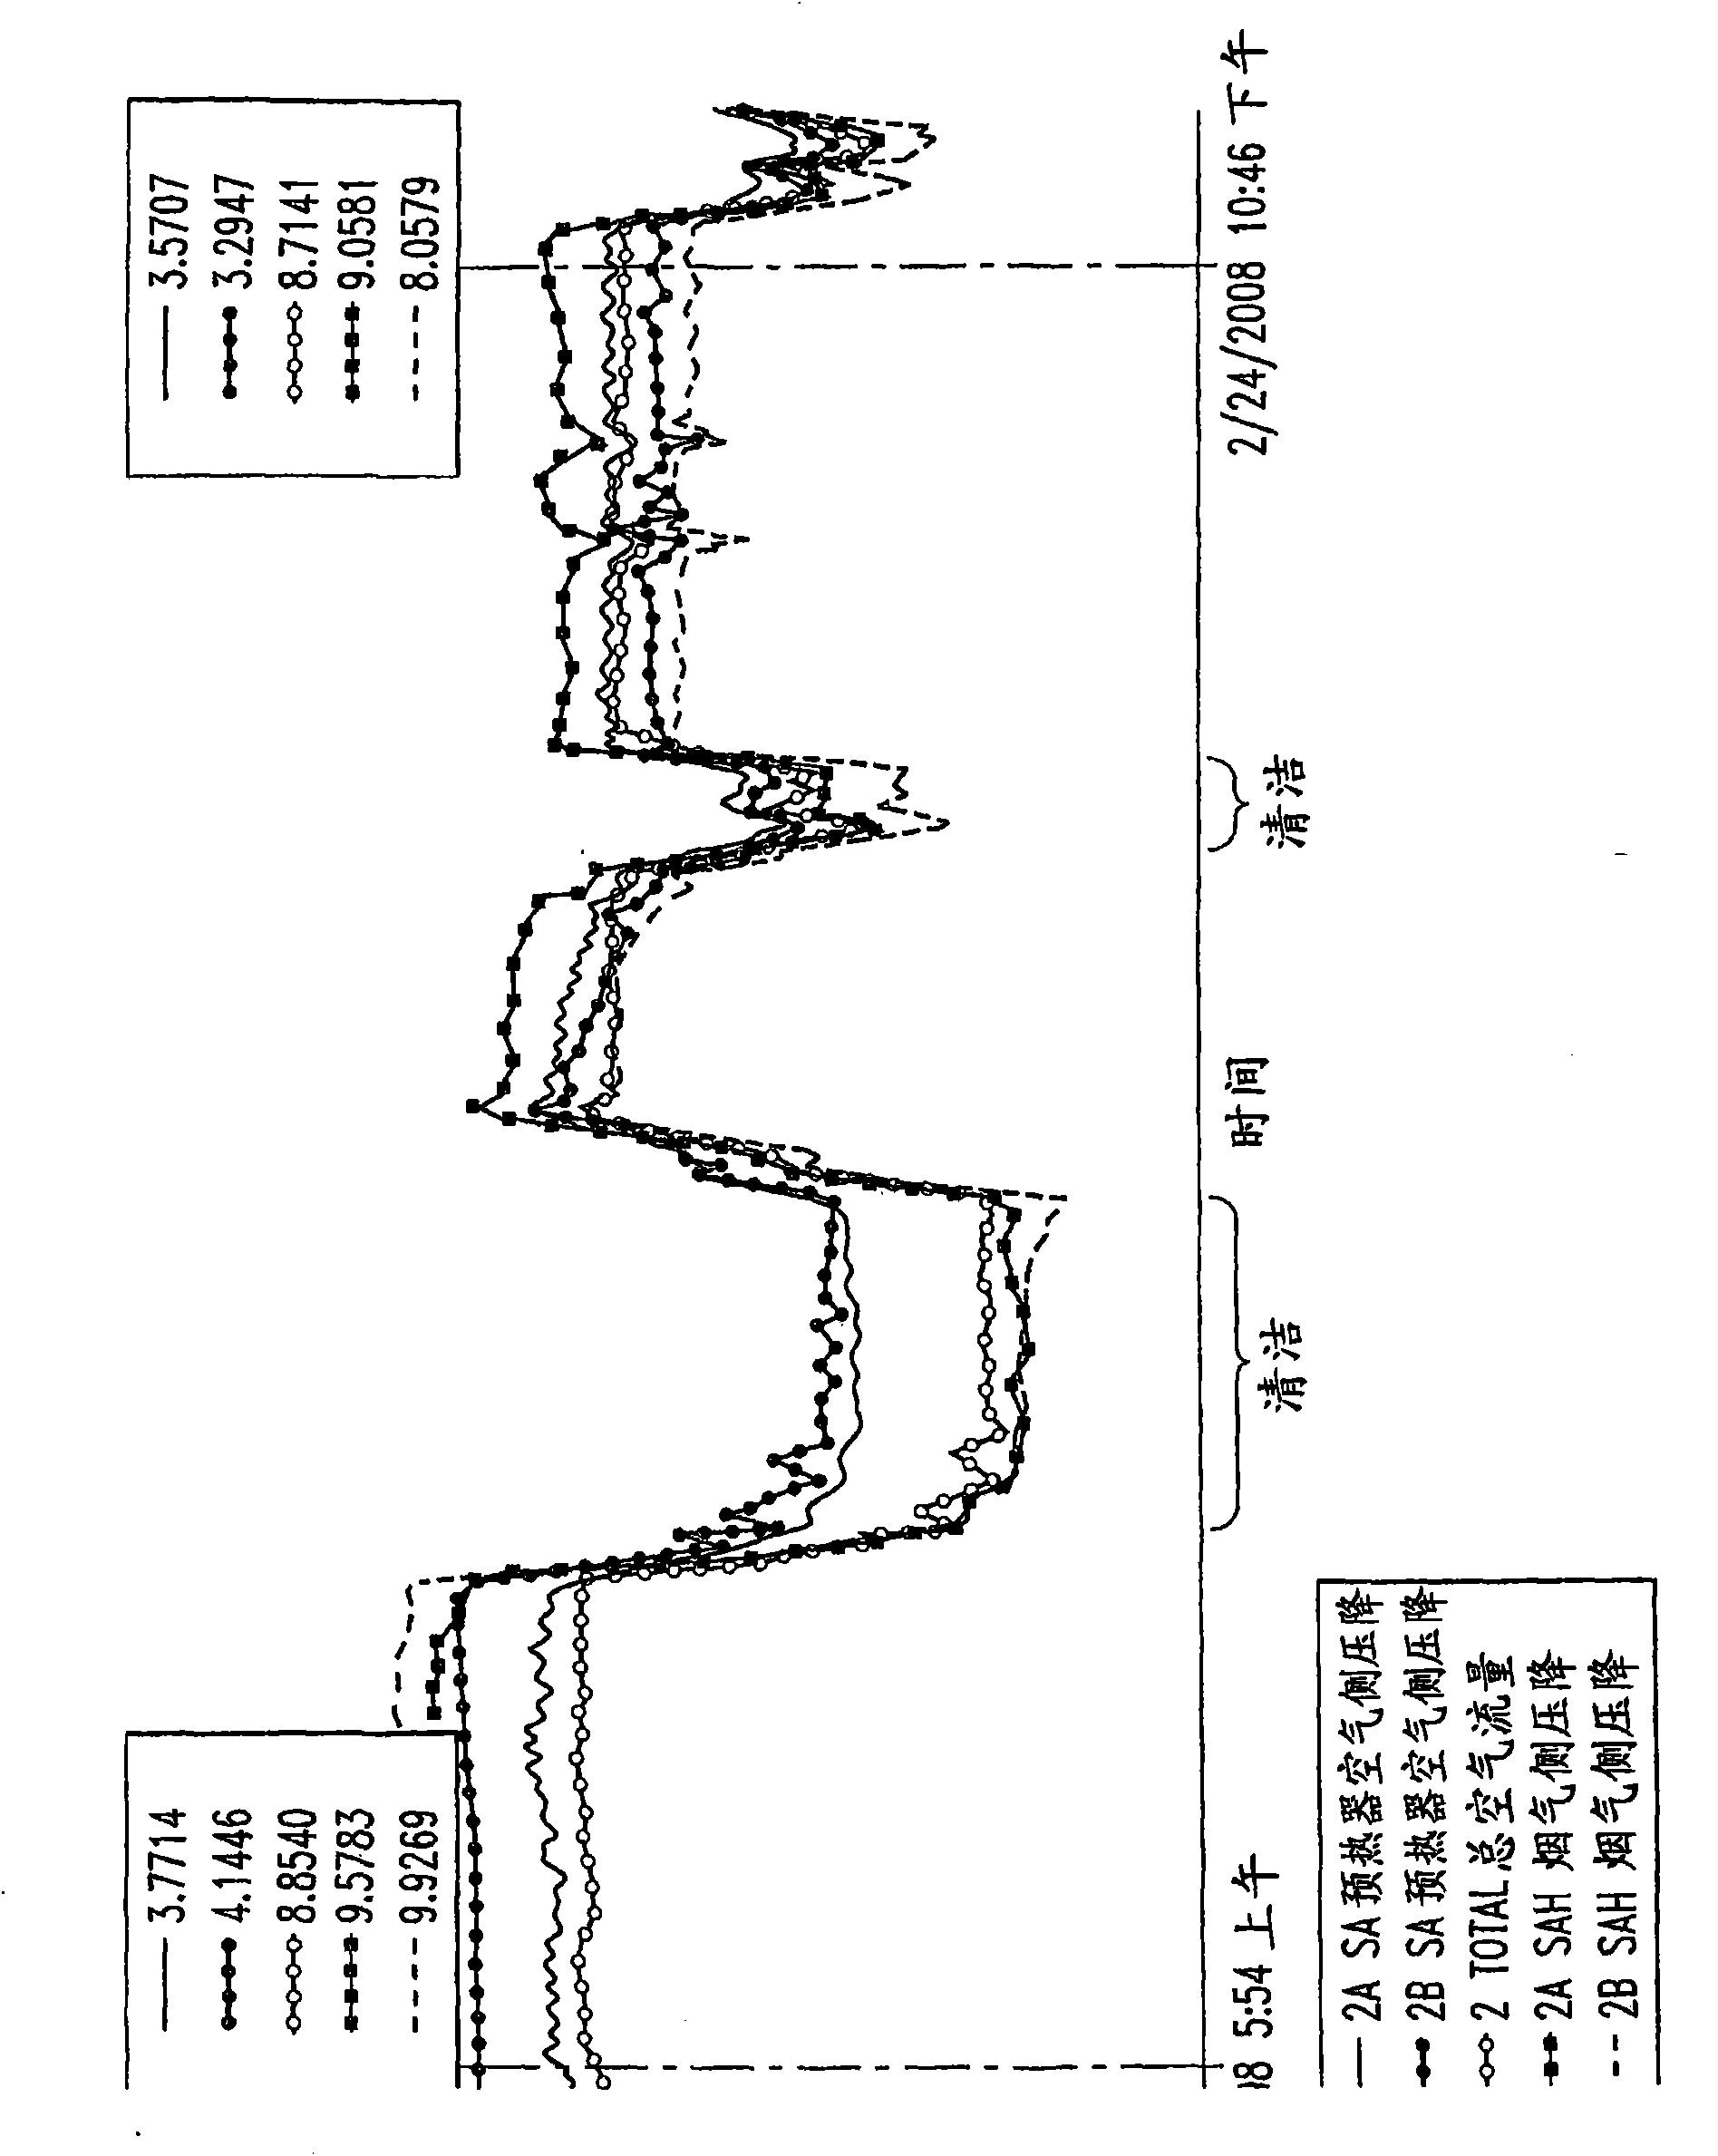 Method for online cleaning of air preheaters